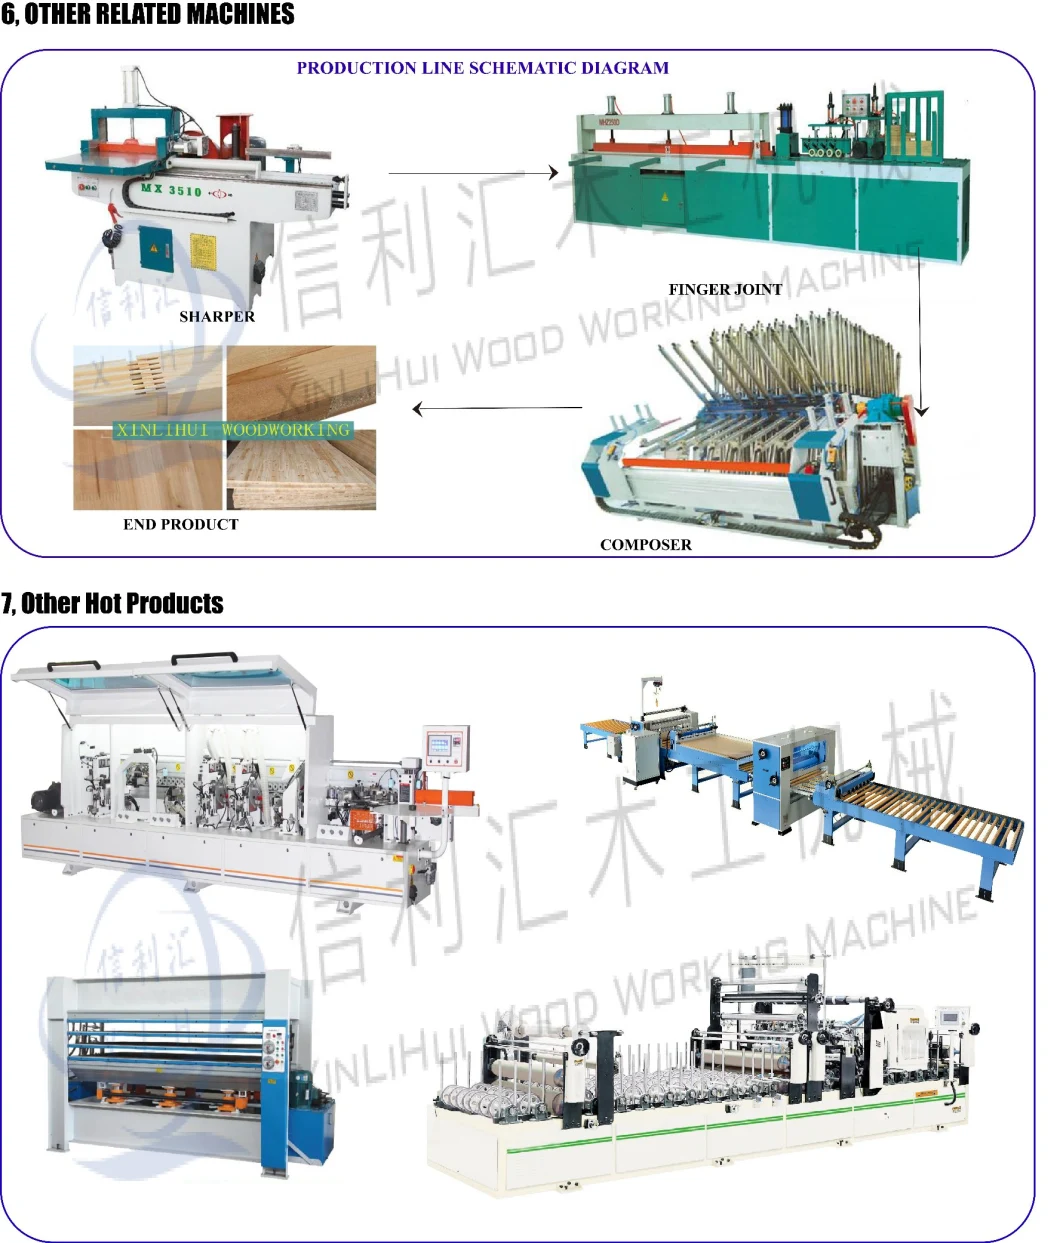 Woodworking Automatic Finger Joint Press Machine for Home Appliance and Industrial Components